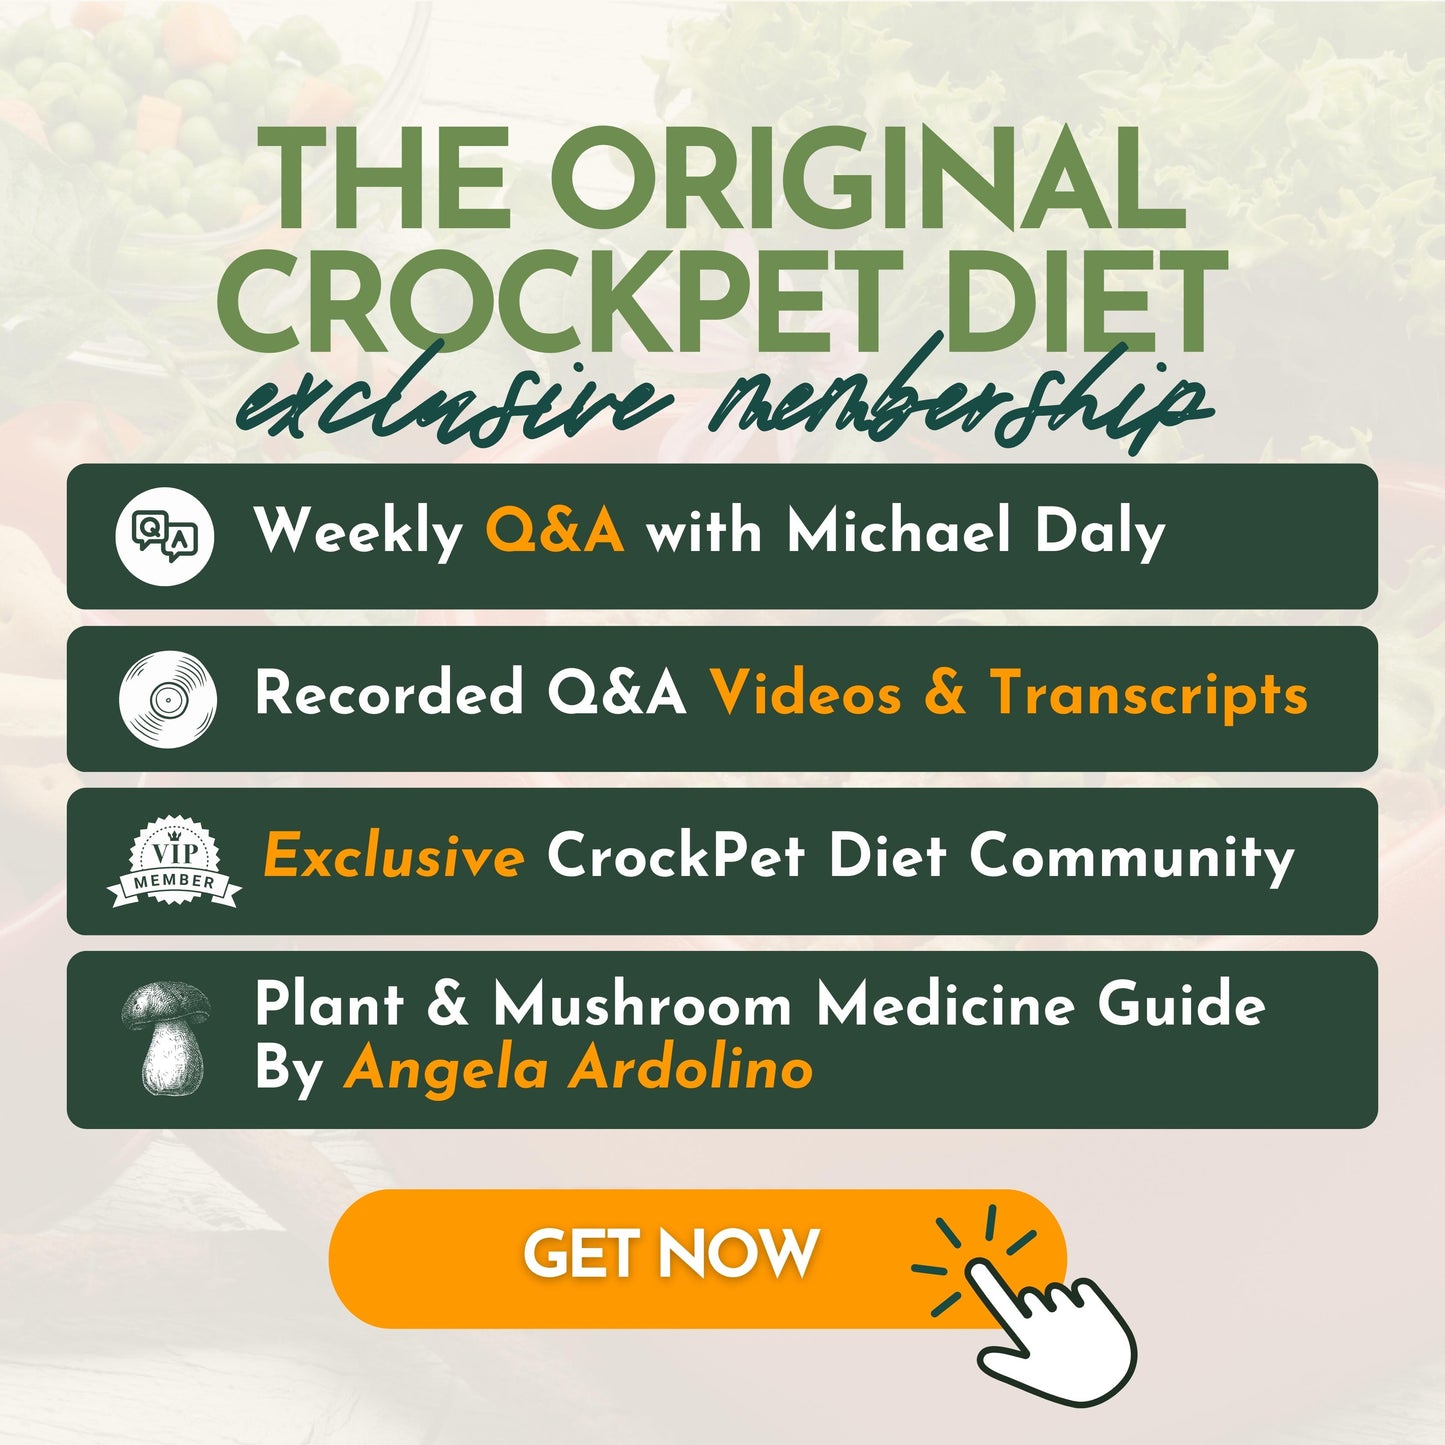 The Original Crockpet Diet by Dr. Ruth - Annual Membership